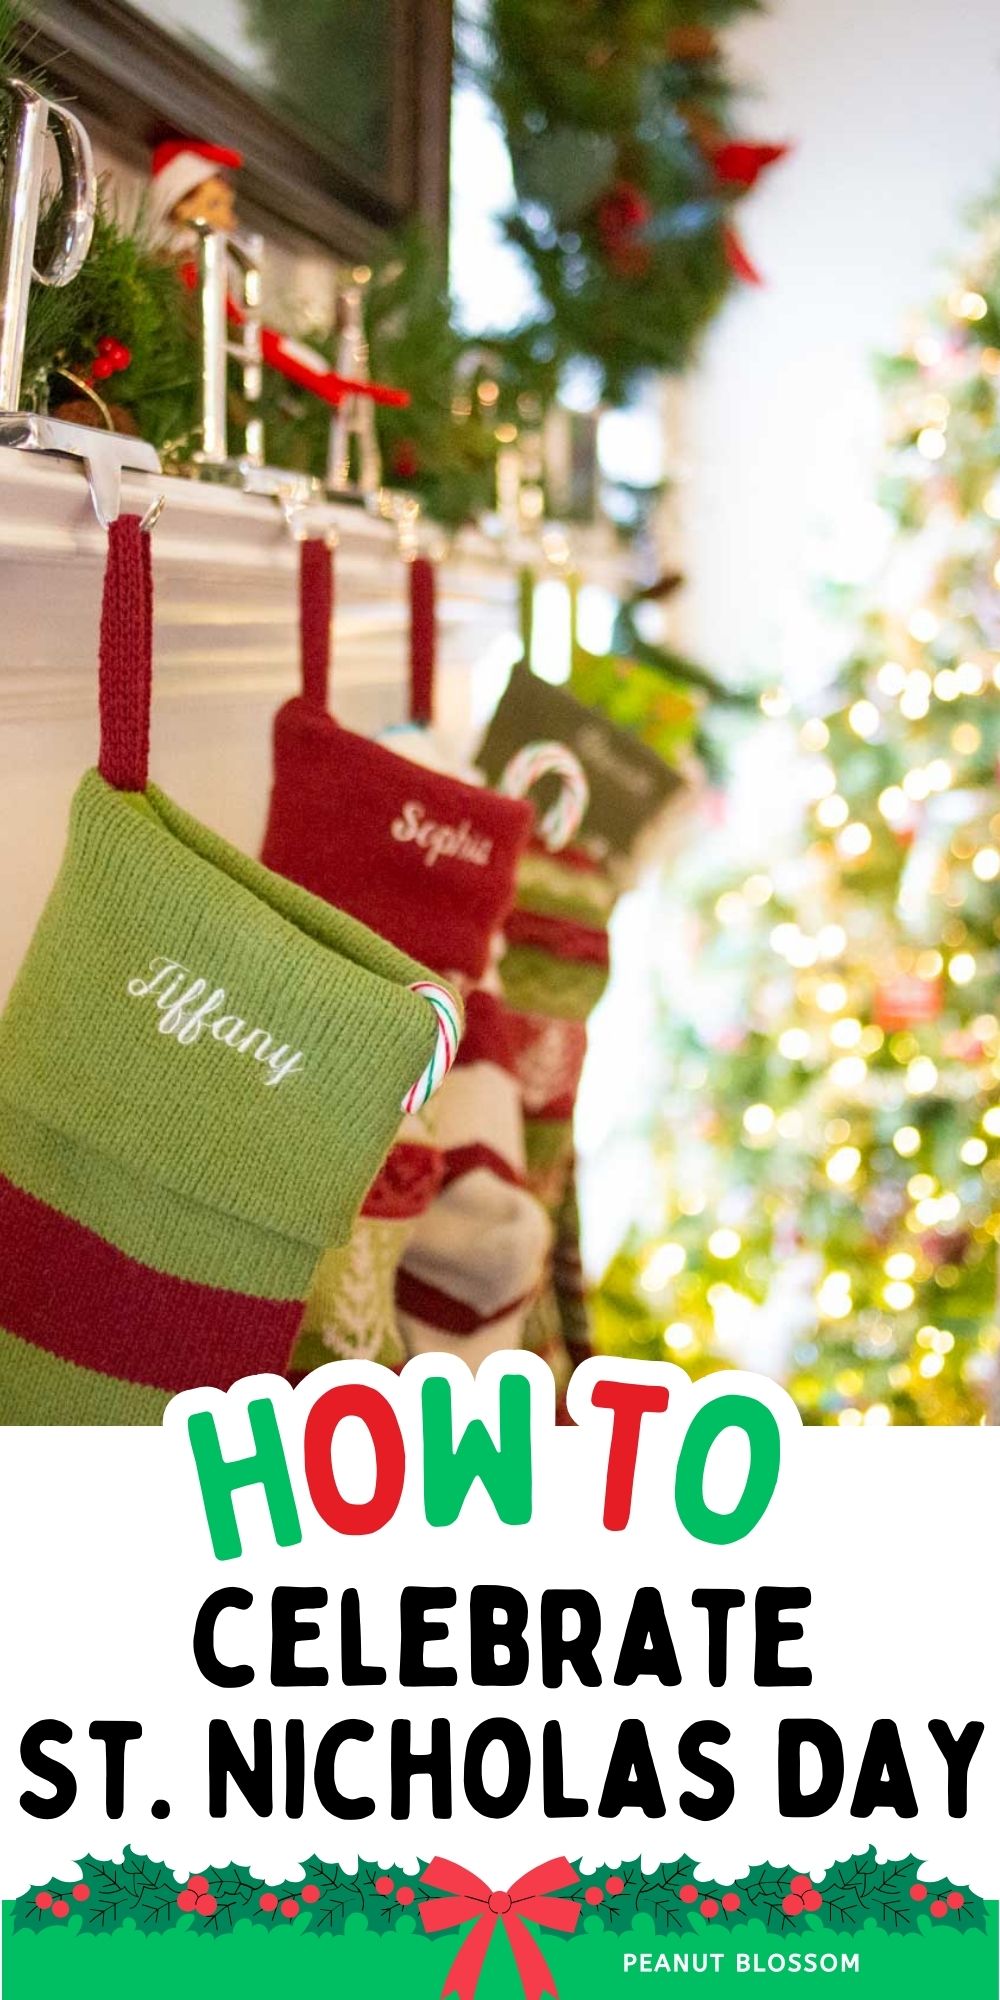 The photo shows stockings filled with St. Nicholas goodies.